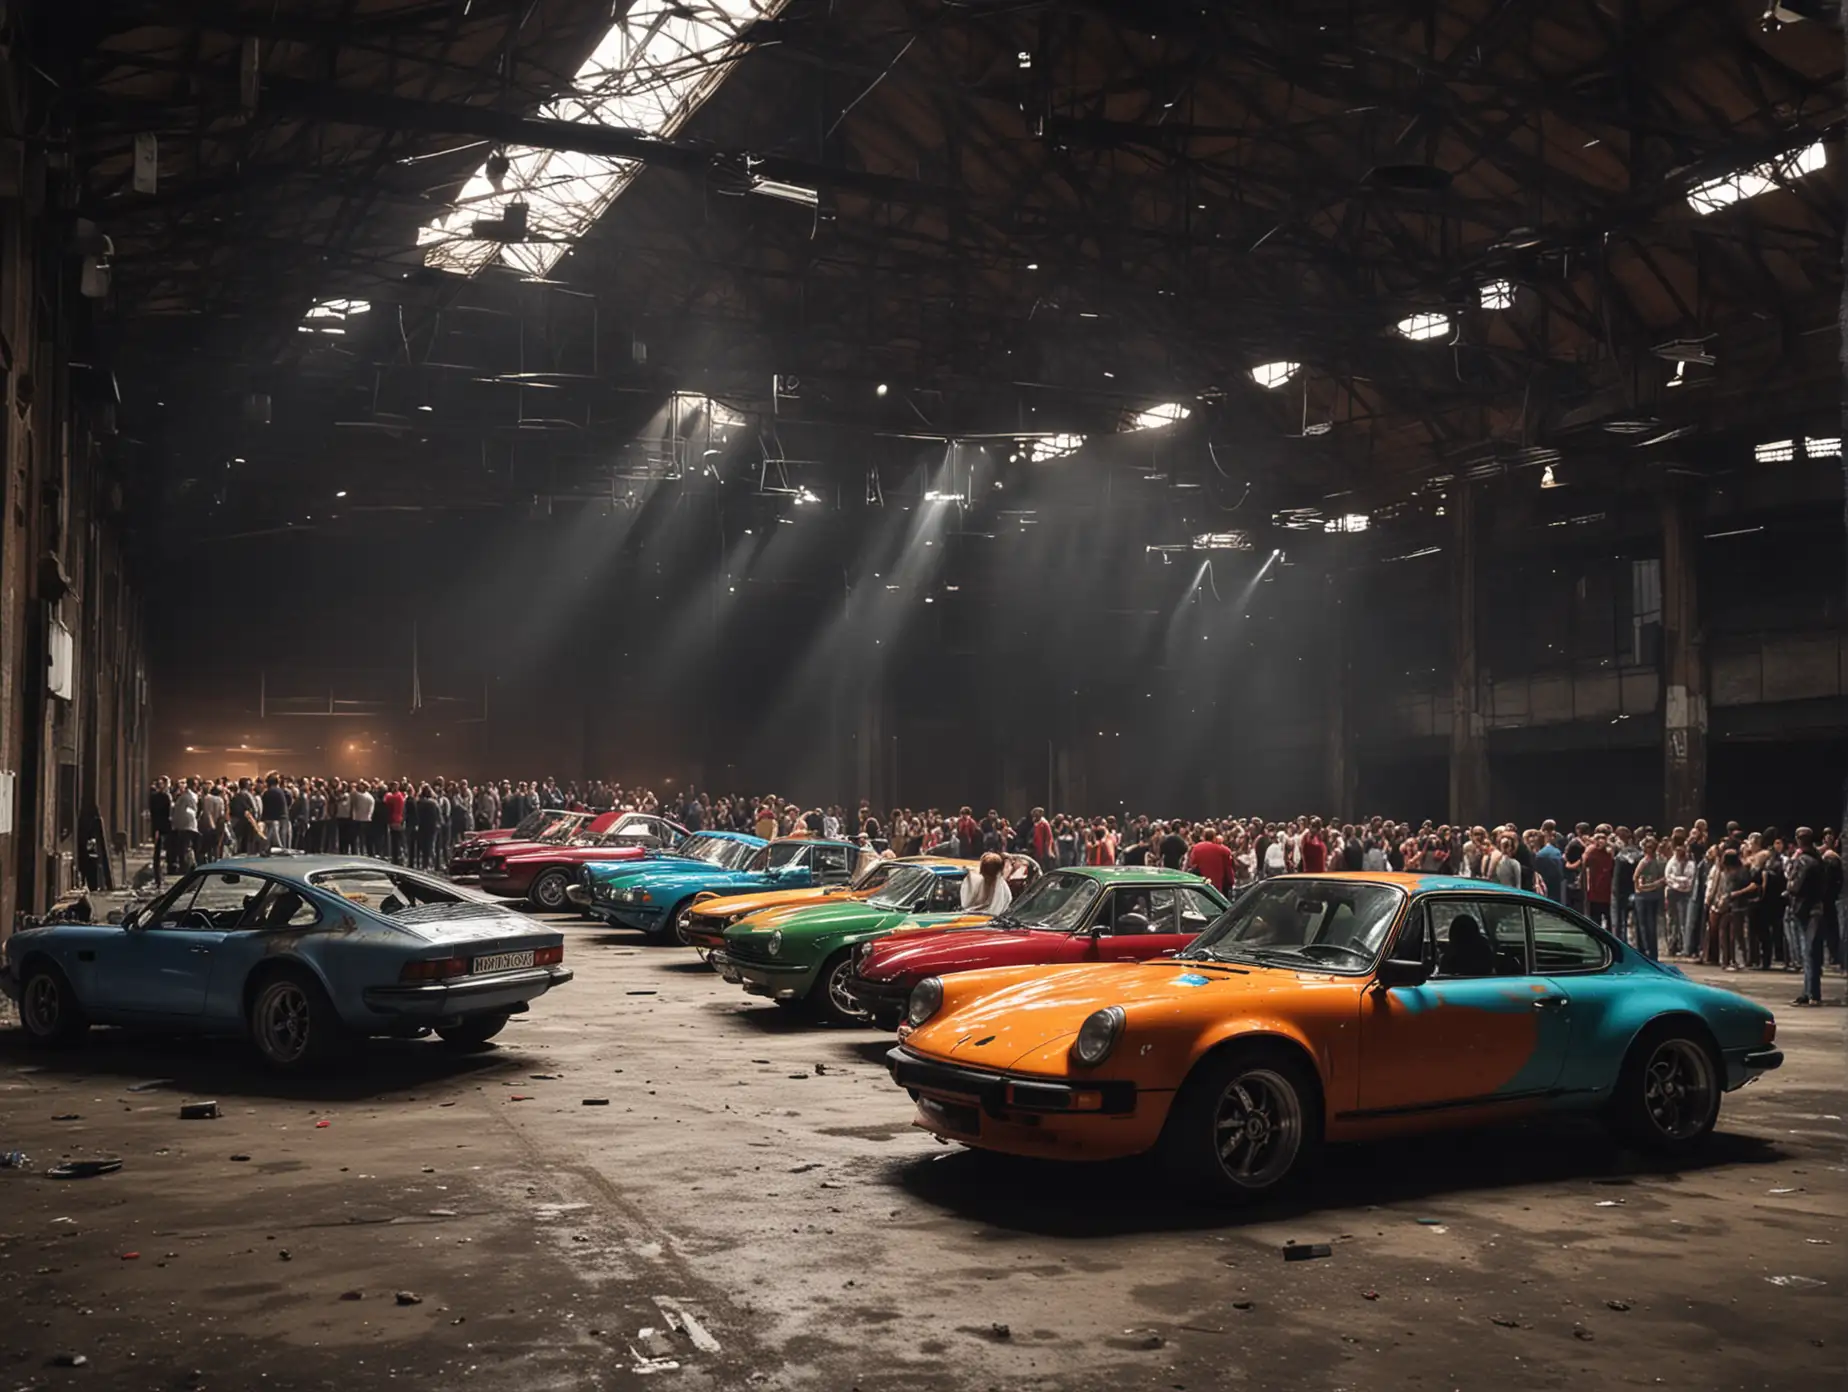 meeting 20 sport cars in diferent colors party in dark and abandoned old factory hall, lot of peoples dancing, hall is in the dark, show light shinning from the roof, dj playning from the stage, 1 bmw and 1 porsche car in the front




